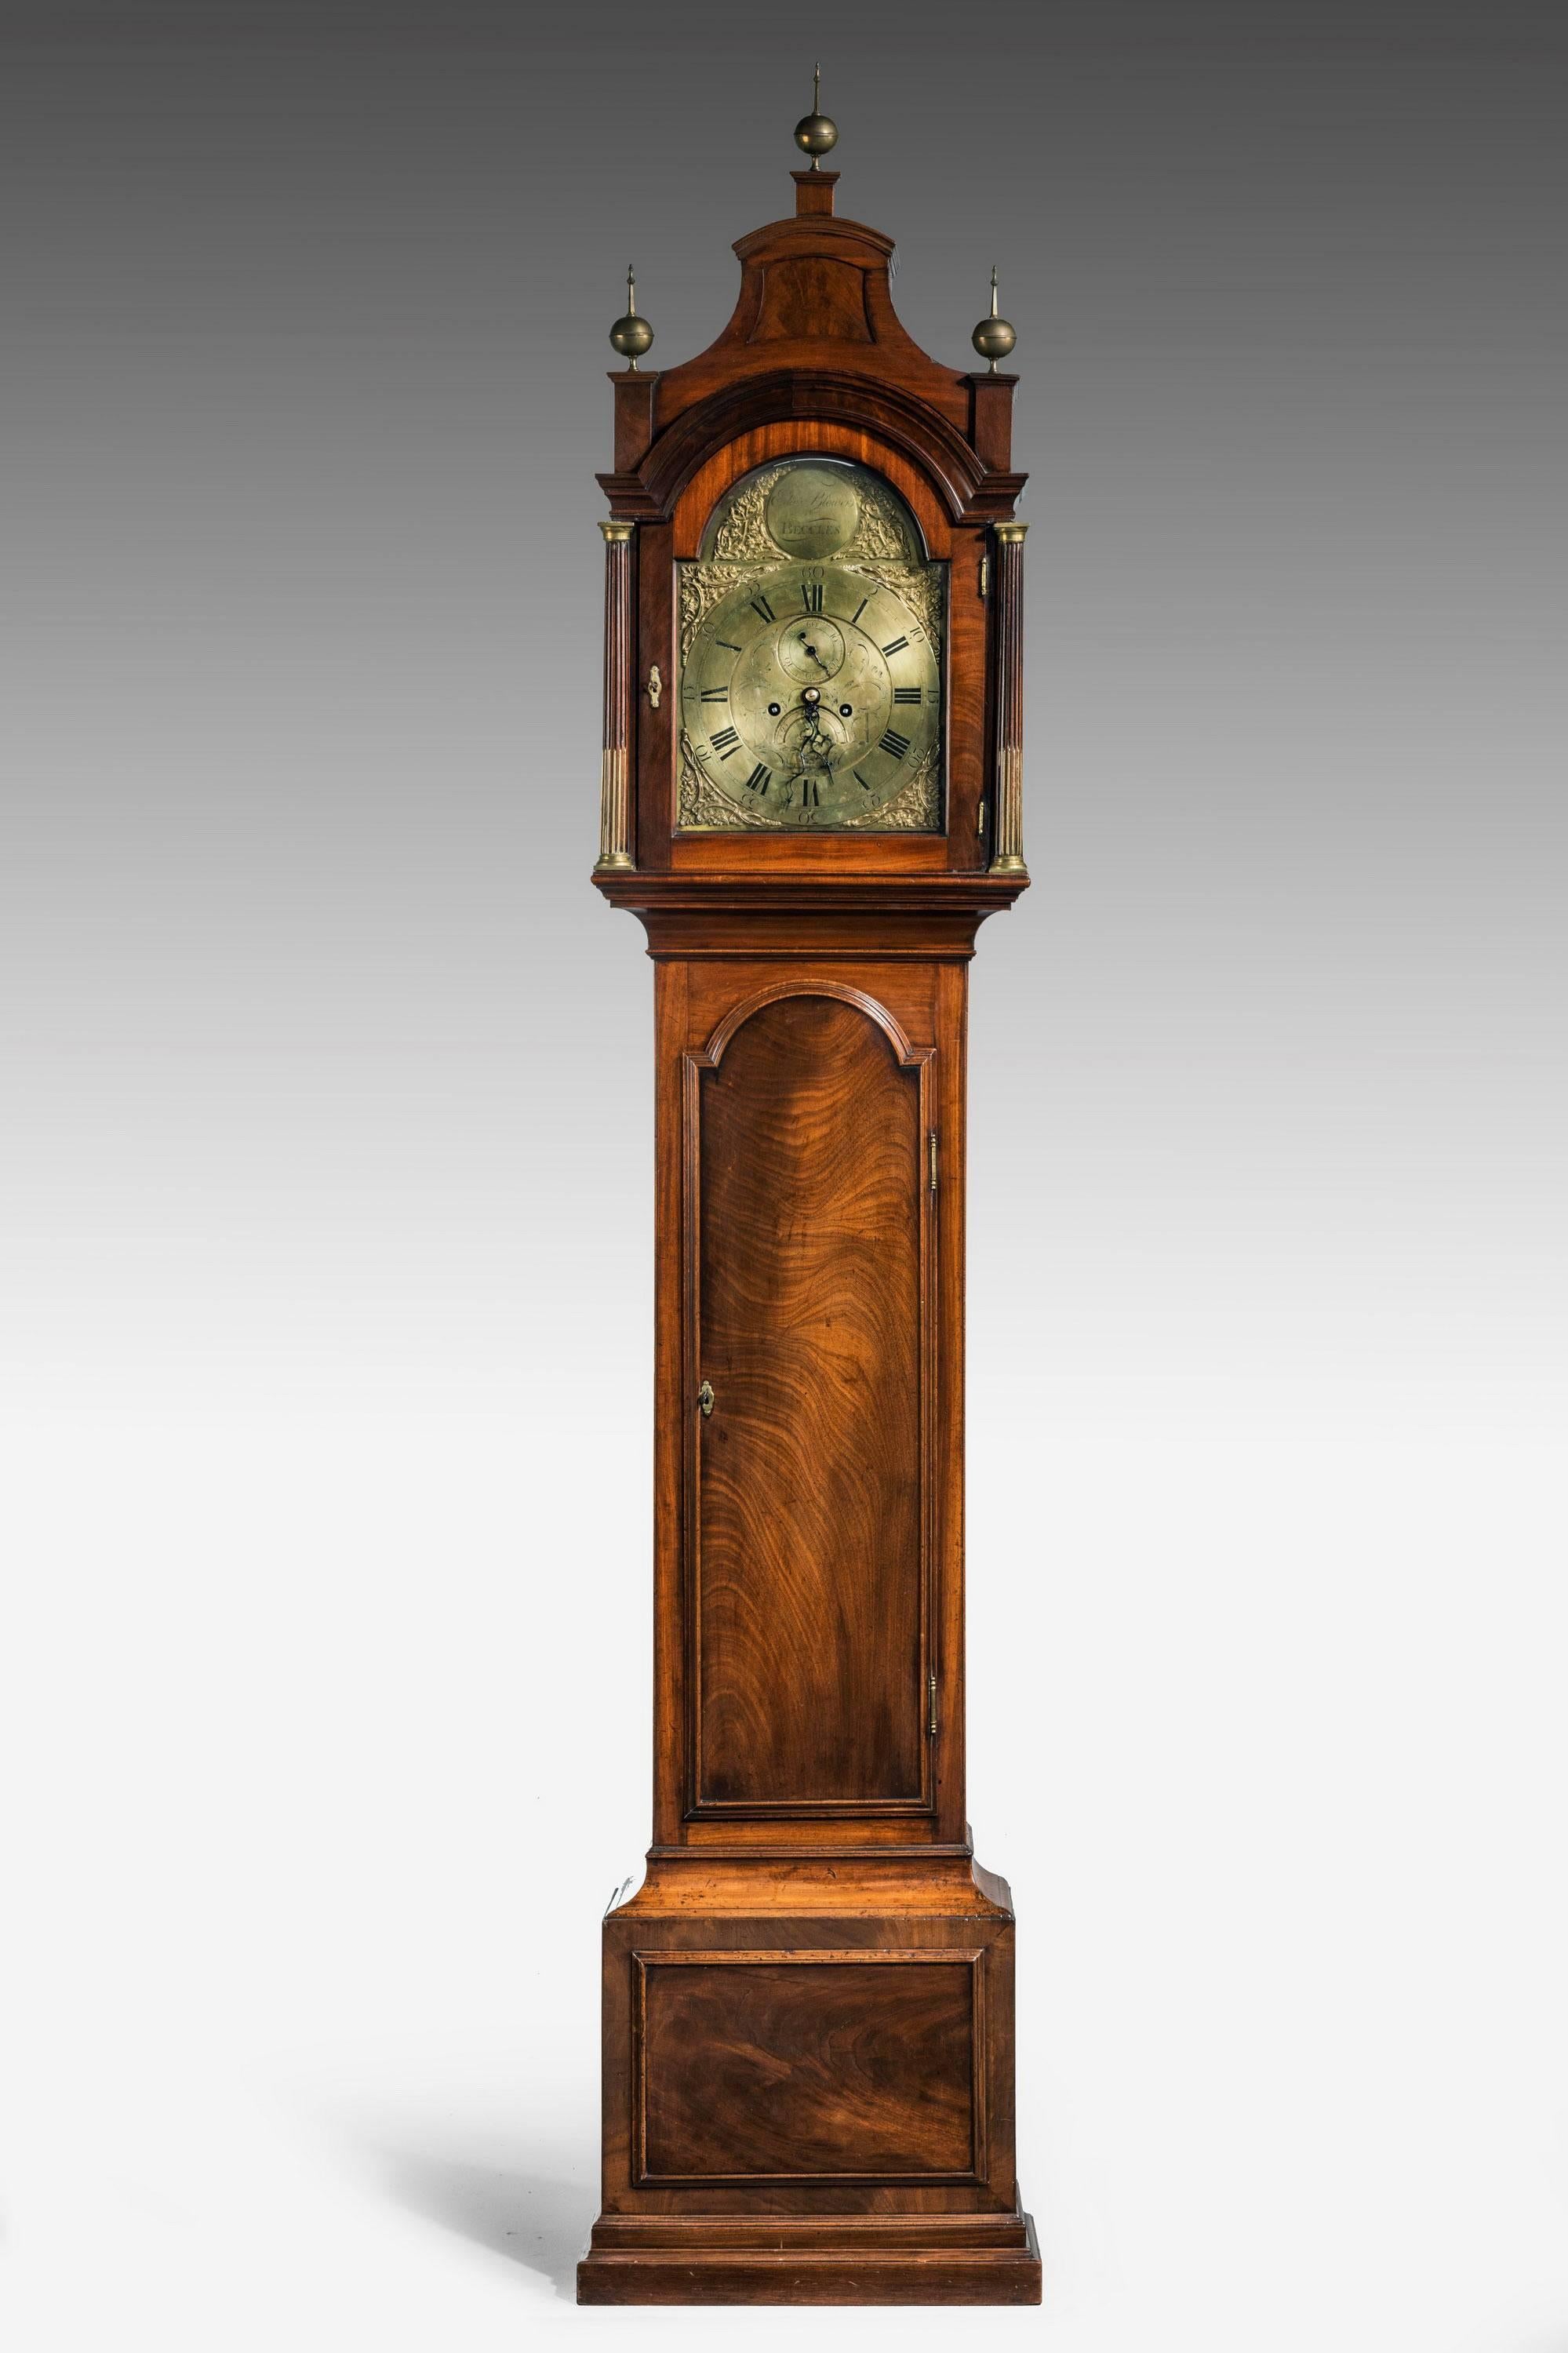 A George III period mahogany Longcase clock by Edward Blower of Beccles. The case in excellent original condition. Arch dial to the face with two subsidiary dials. The top with three period finals. Good color and the long door beautifully figured in